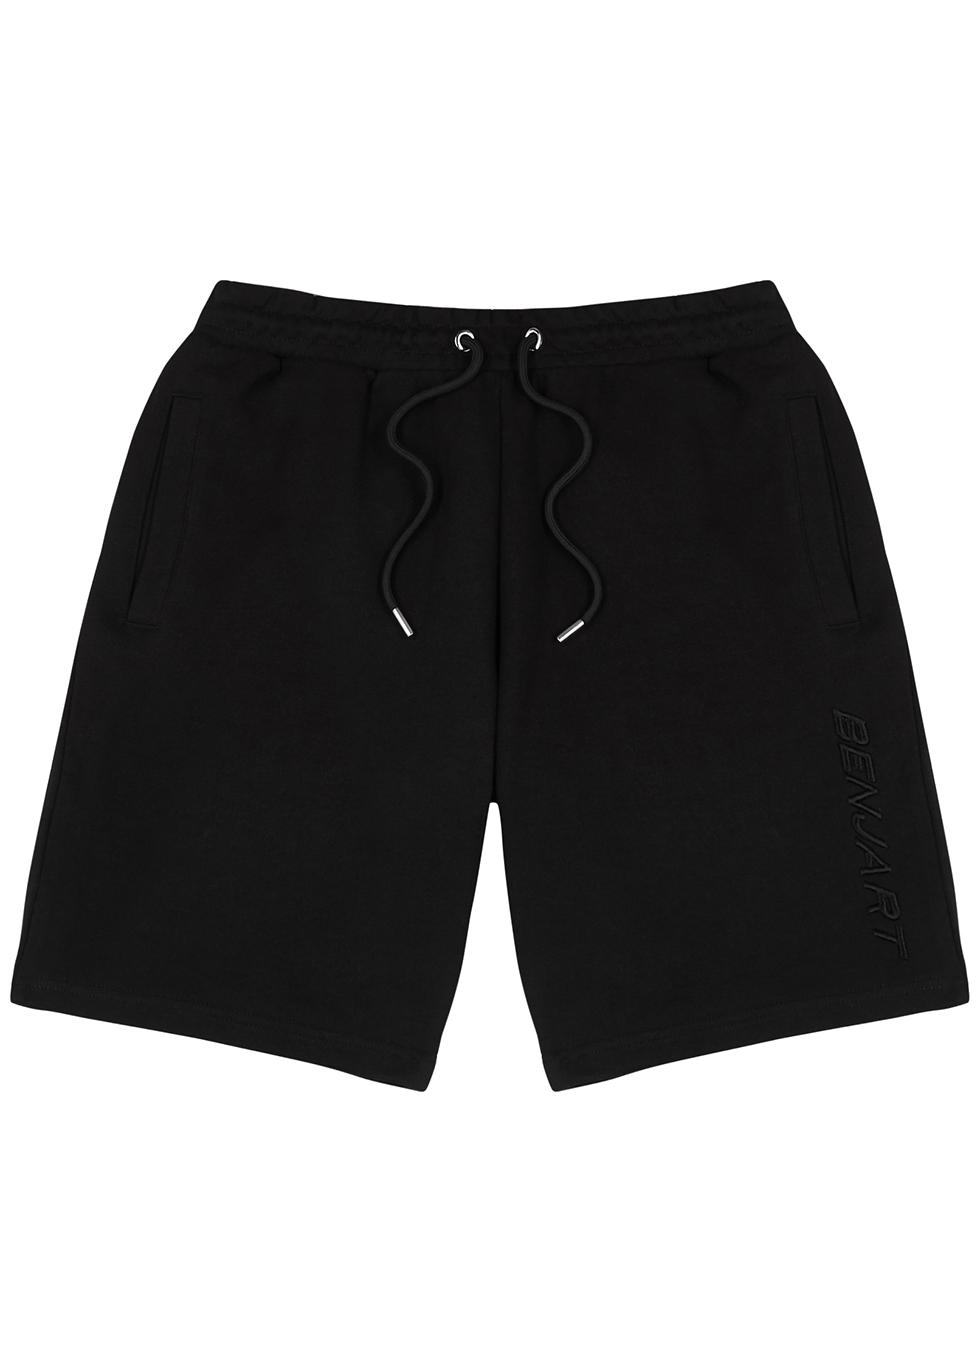 Black logo-embroidered cotton shorts by BENJART